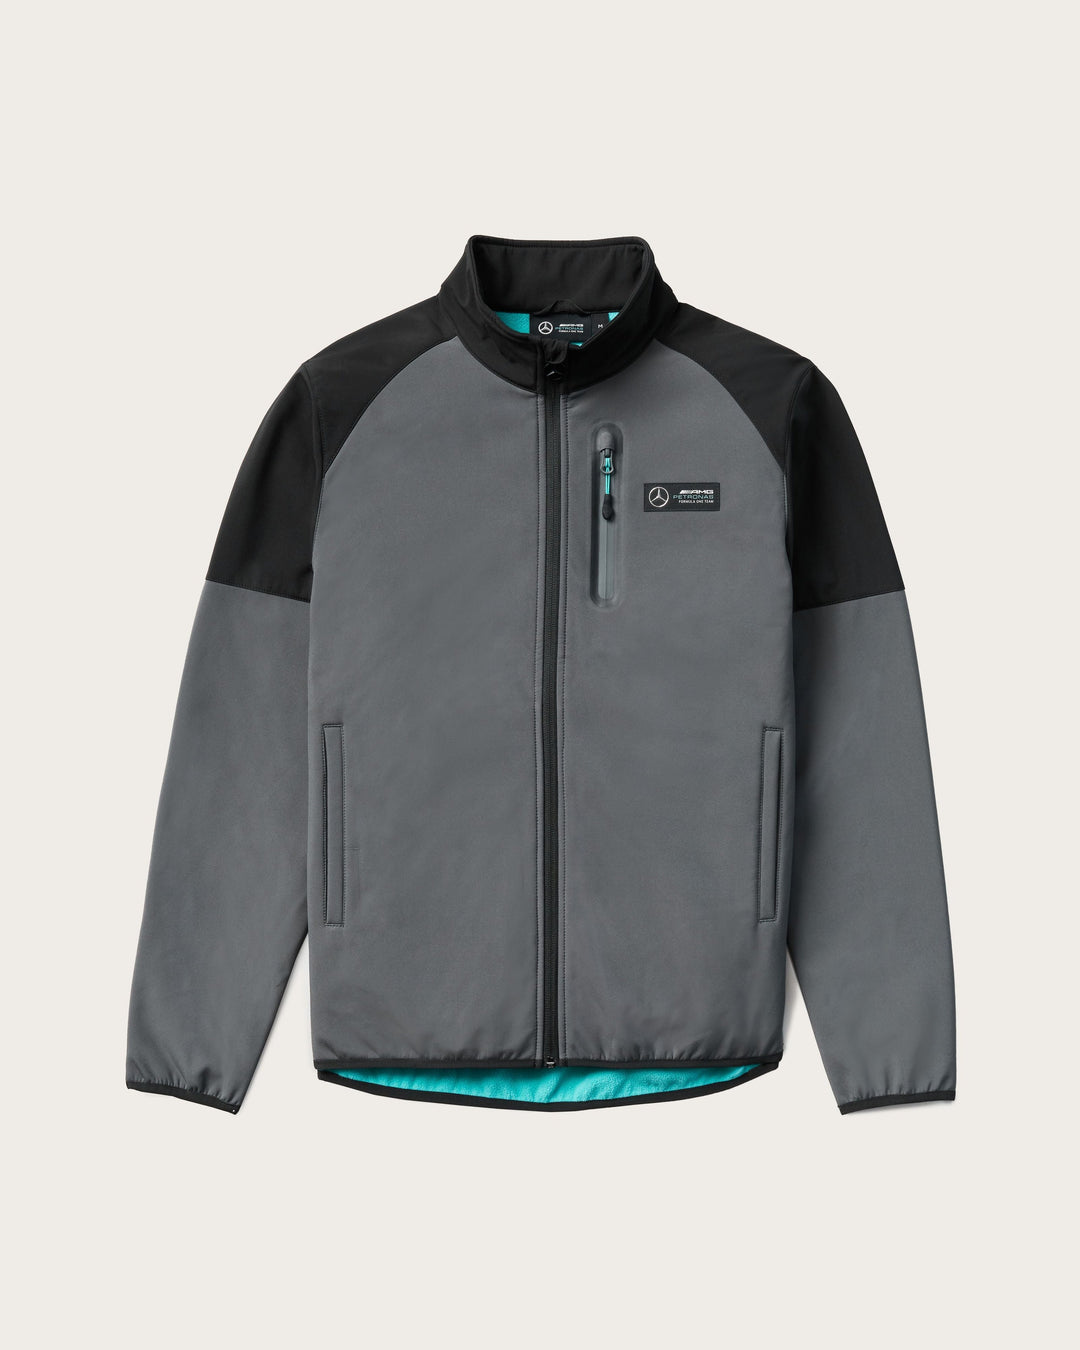 Mercedes Benz AMG F1 Team Petronas Grey and Black Men's Official Softshell Jacket